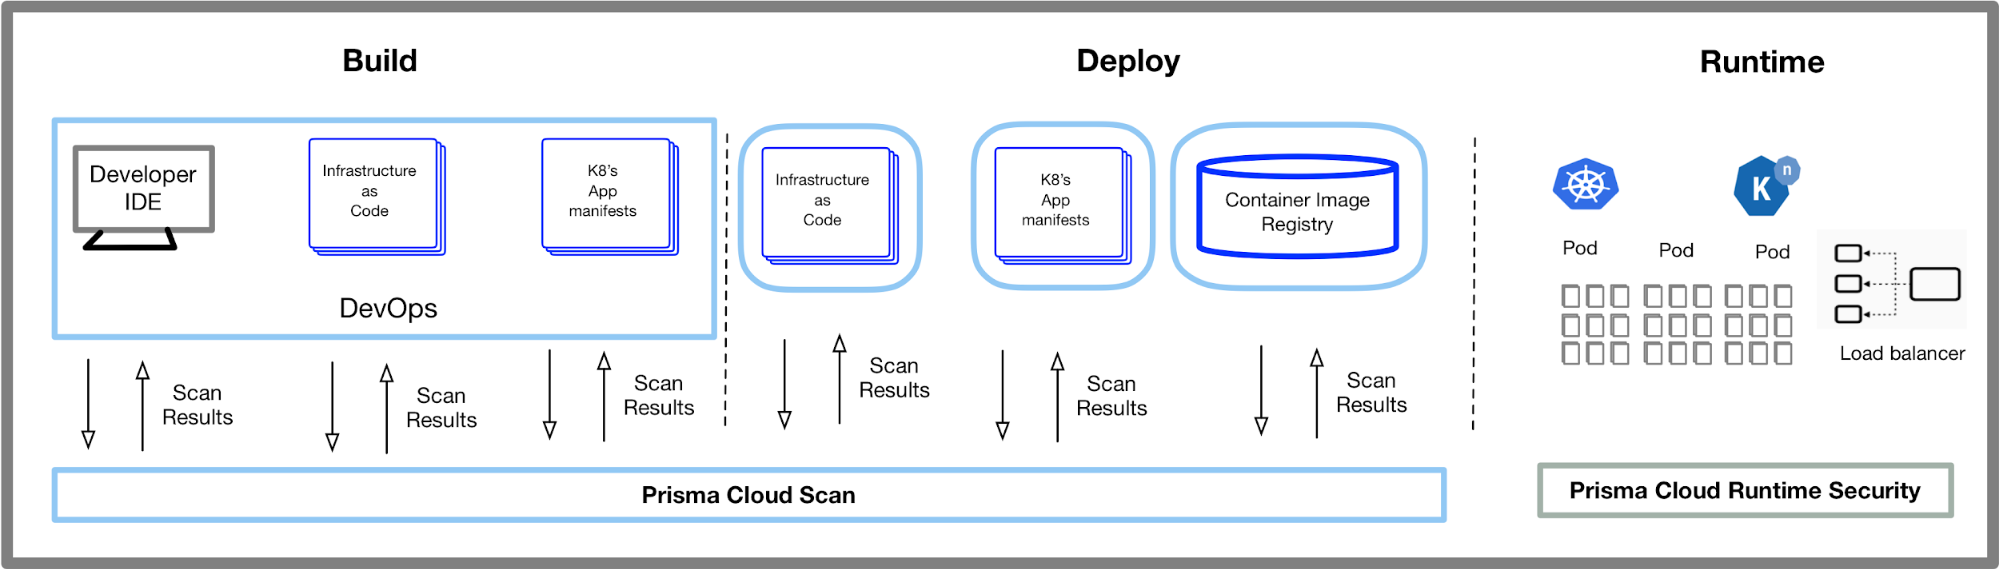 This diagram shows the security touchpoints across the build, deploy and run stages of development, showing opportunities to add security into the CI/CD pipeline. Under build, we see Developer IDE and Infrastructure as Code; Under Deploy, we see Infrastructure as Code and Container Image Registry; Under Runtime, we see how Prisma Cloud Runtime Security protects running software.